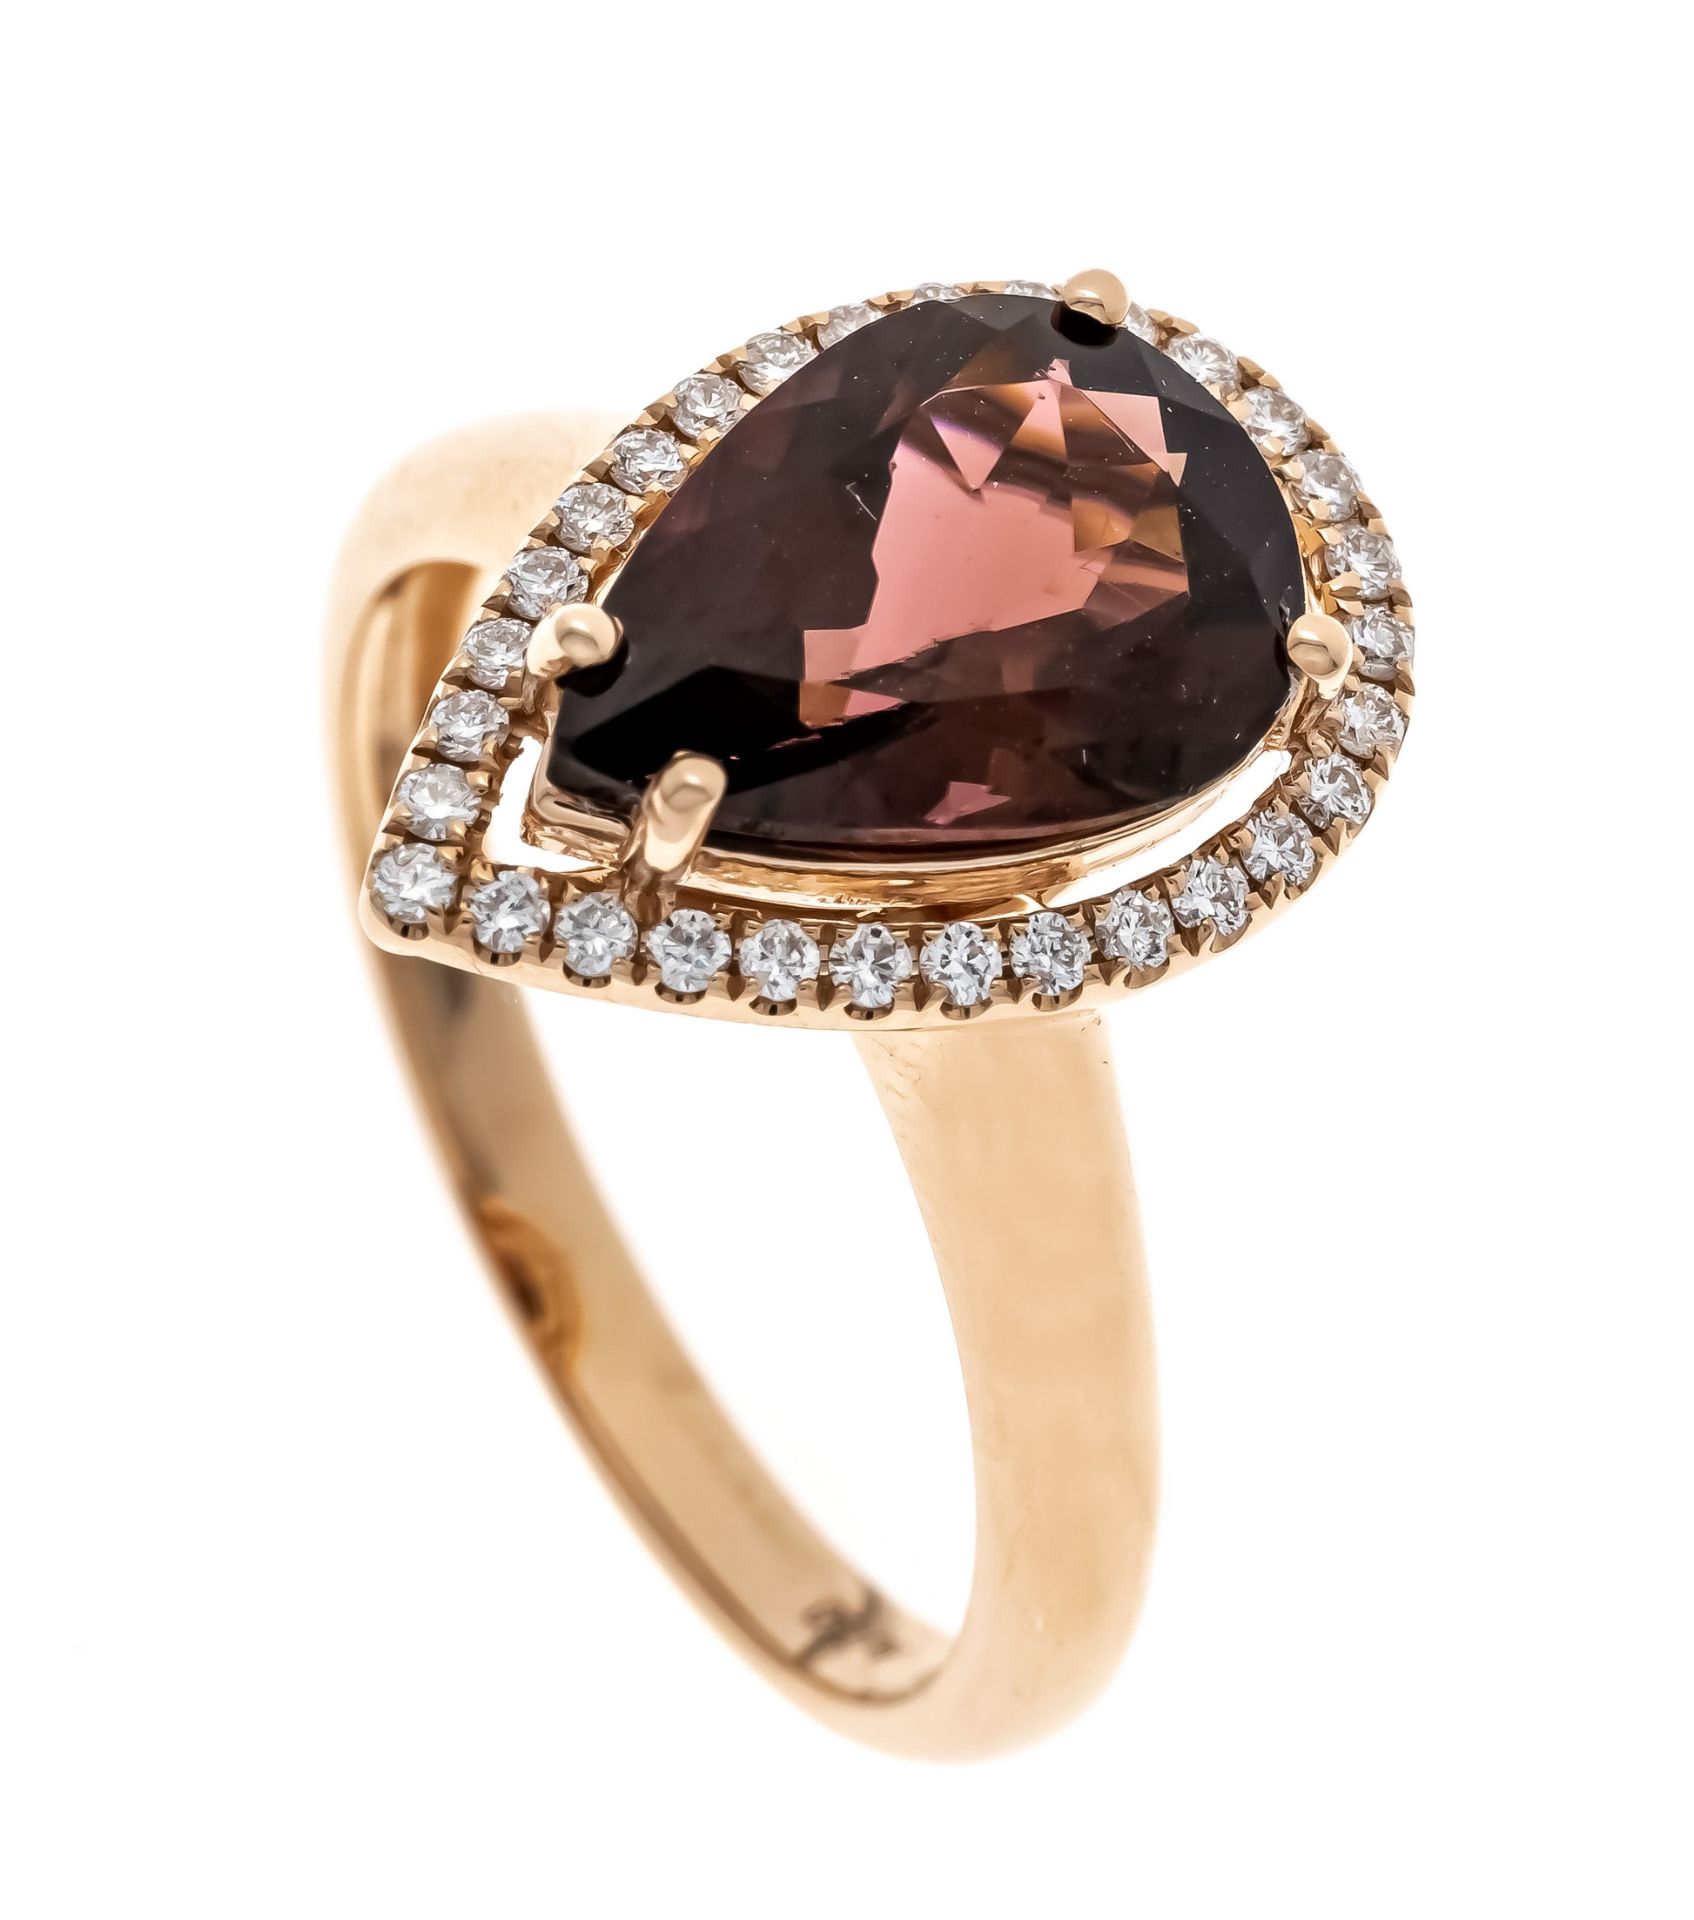 Rubellite brilliant ring RG 750/000 with a drop-shaped faceted rubellite 11.1 x 8.0 mm, brownish